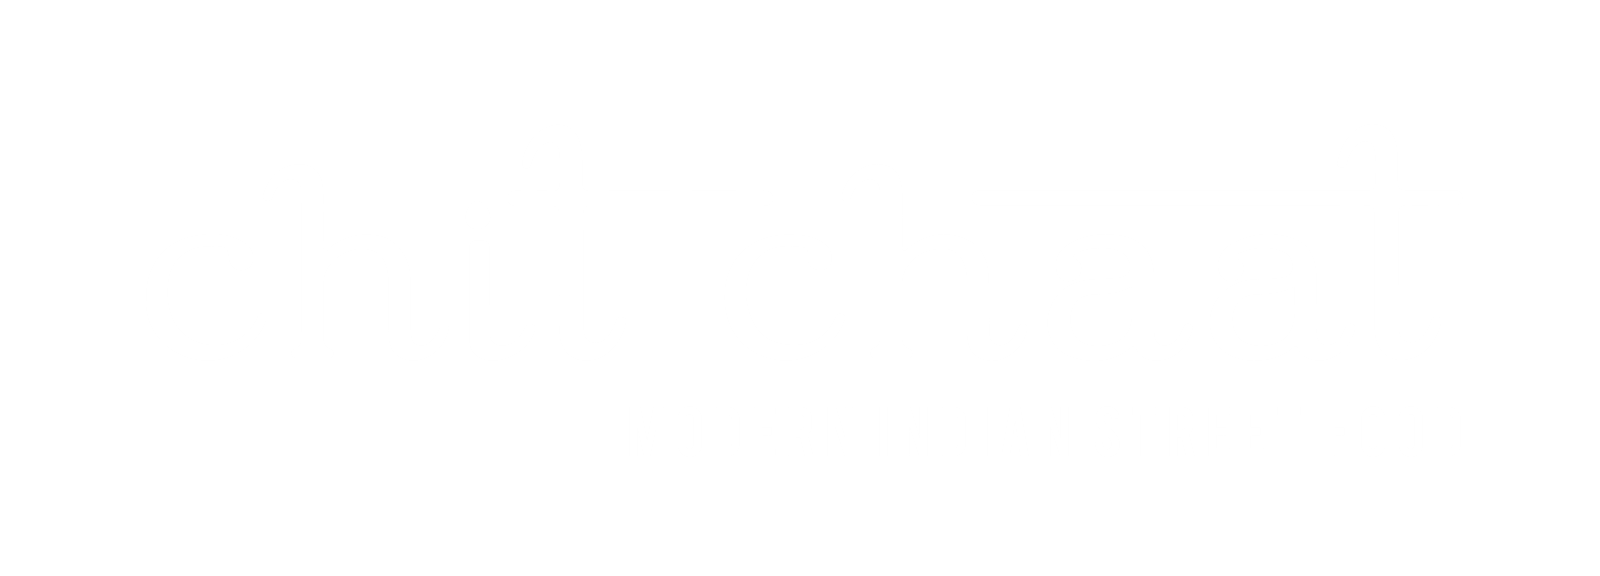 Chit Chaat - Indian Restaurant, Takeaway and Bar in Barnet, North London